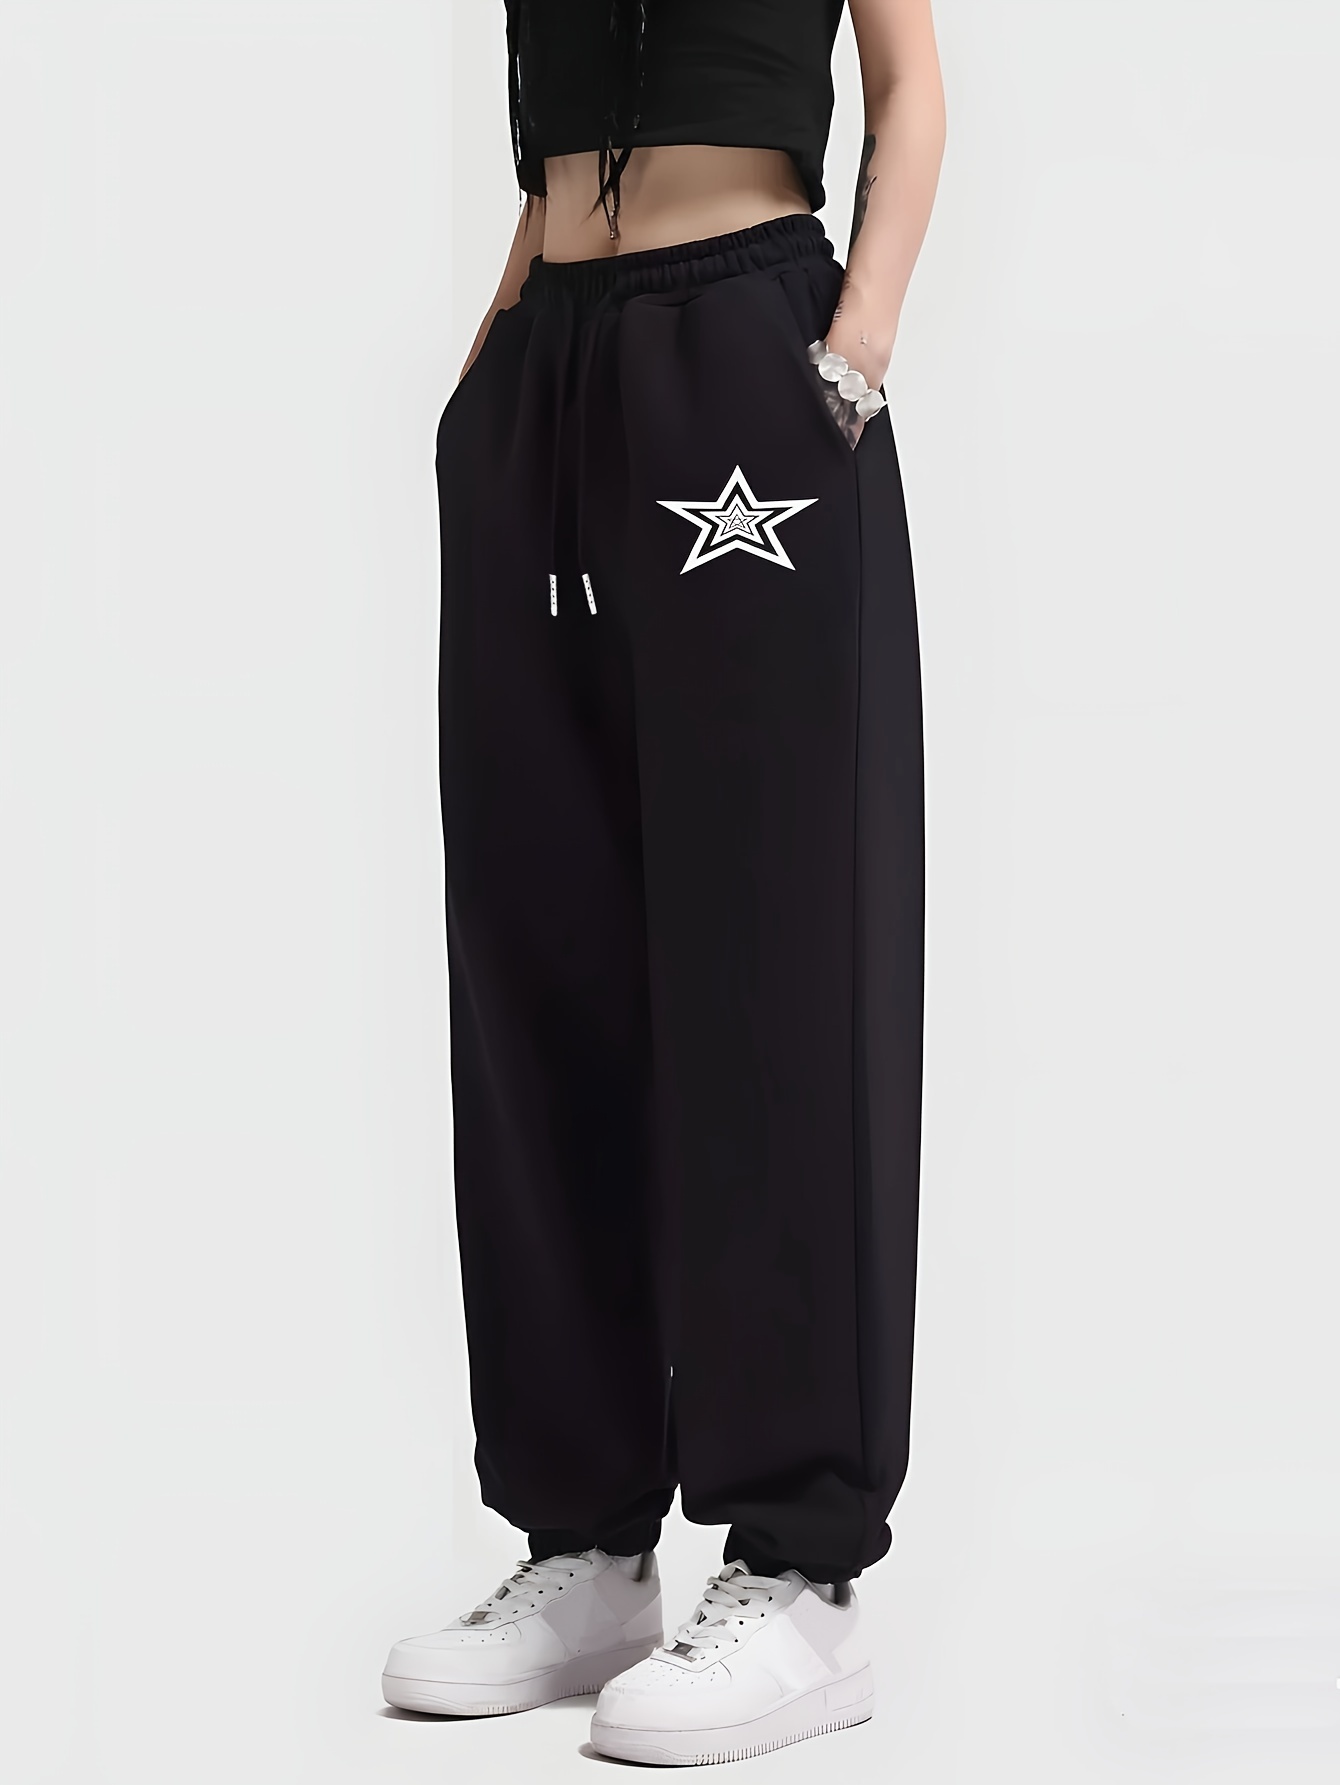 Women's Printed Solid Activewear Jogger Track Cuff Sweatpants